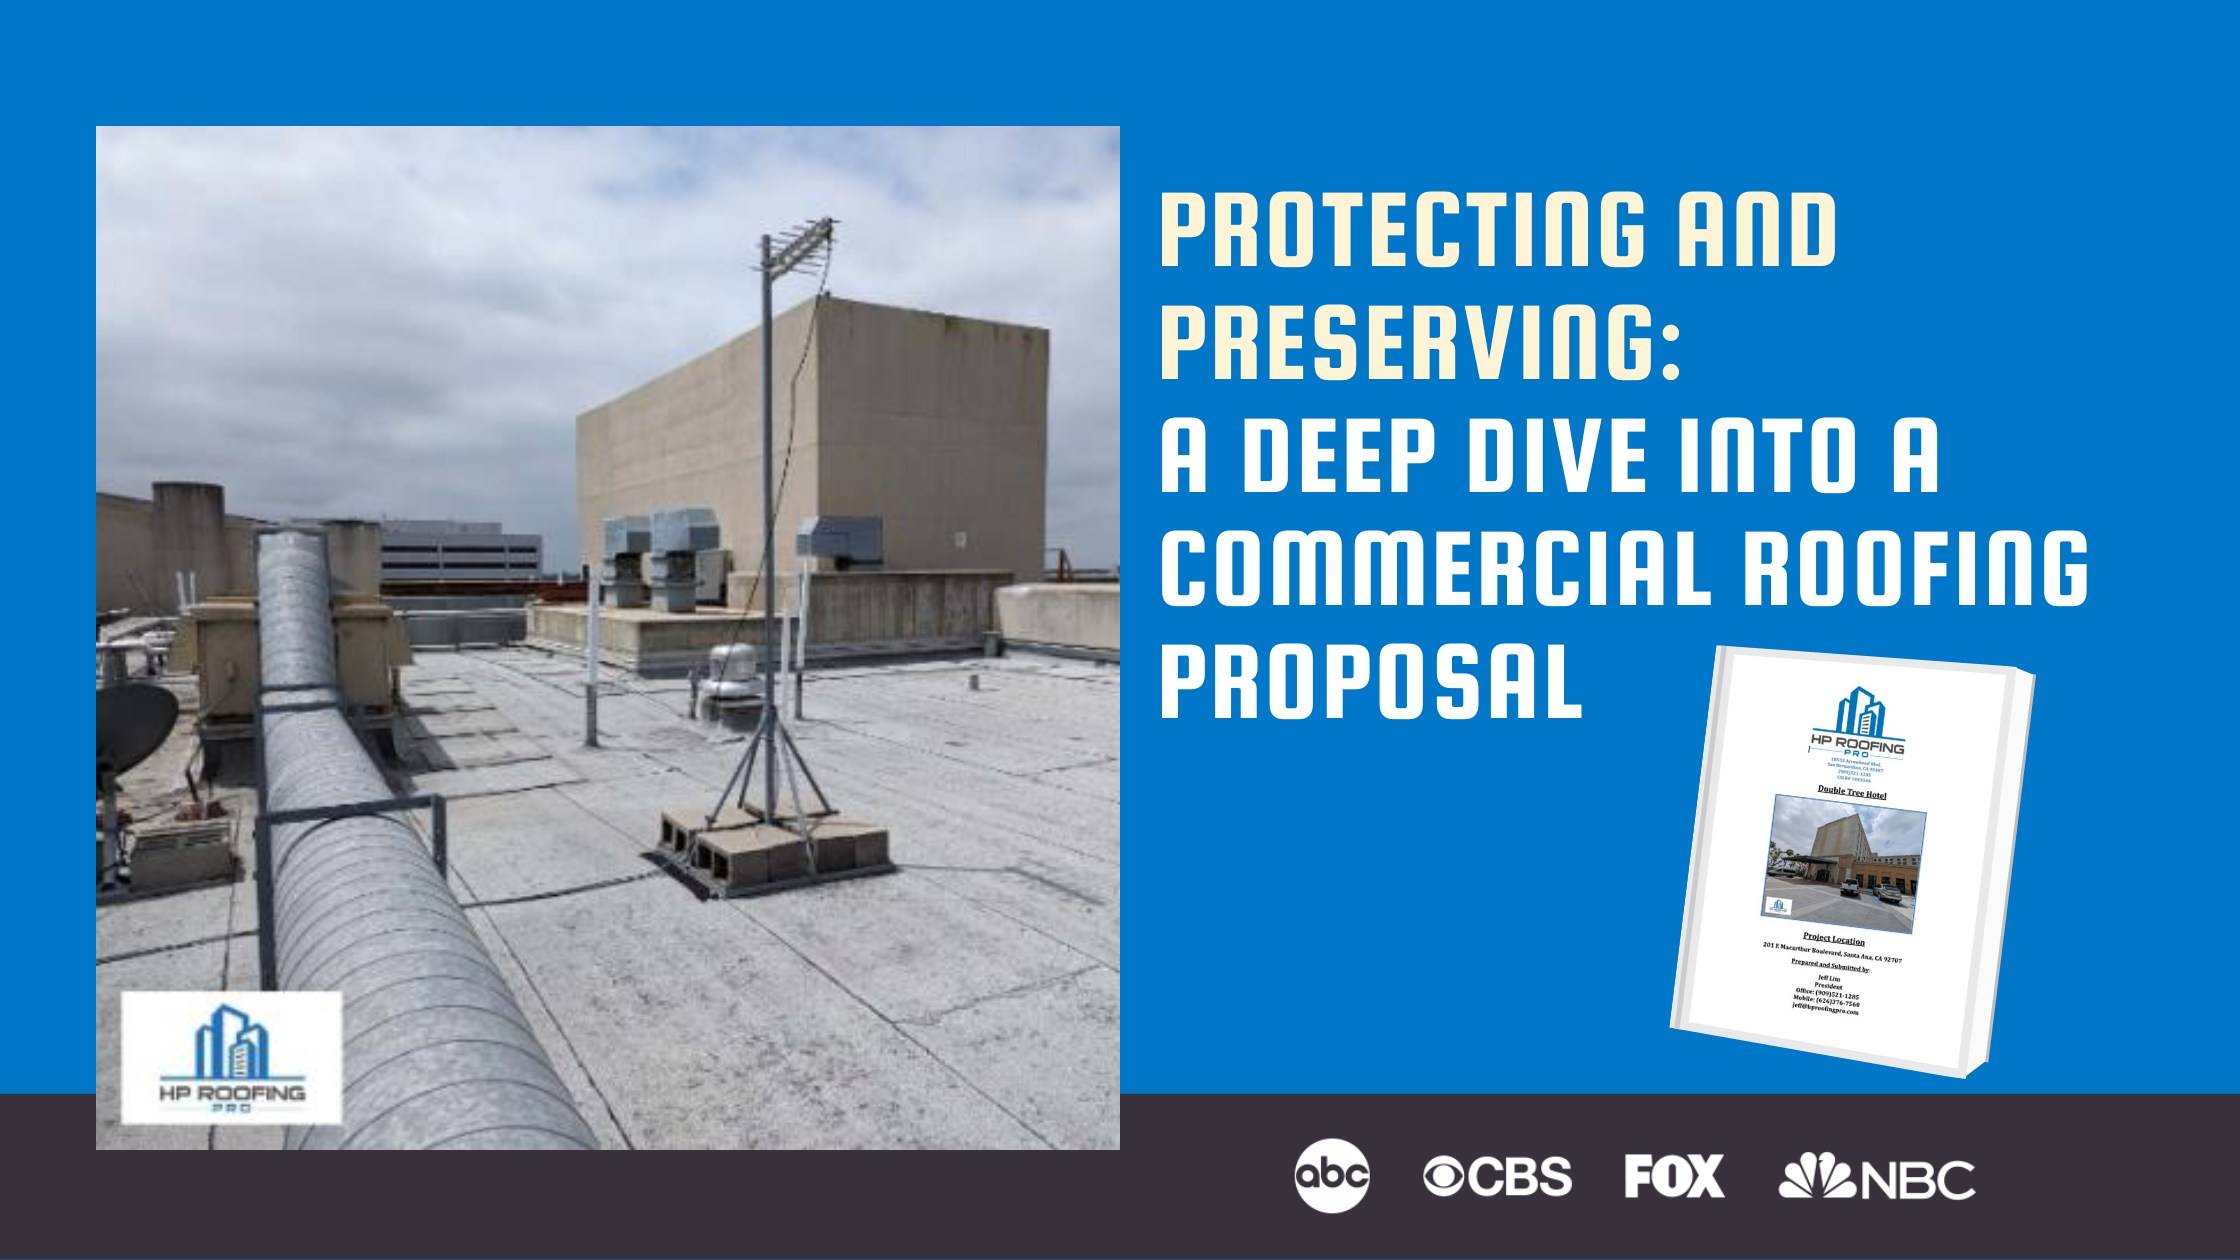 Protecting and Preserving: A Deep Dive into a Commercial Roofing Proposal